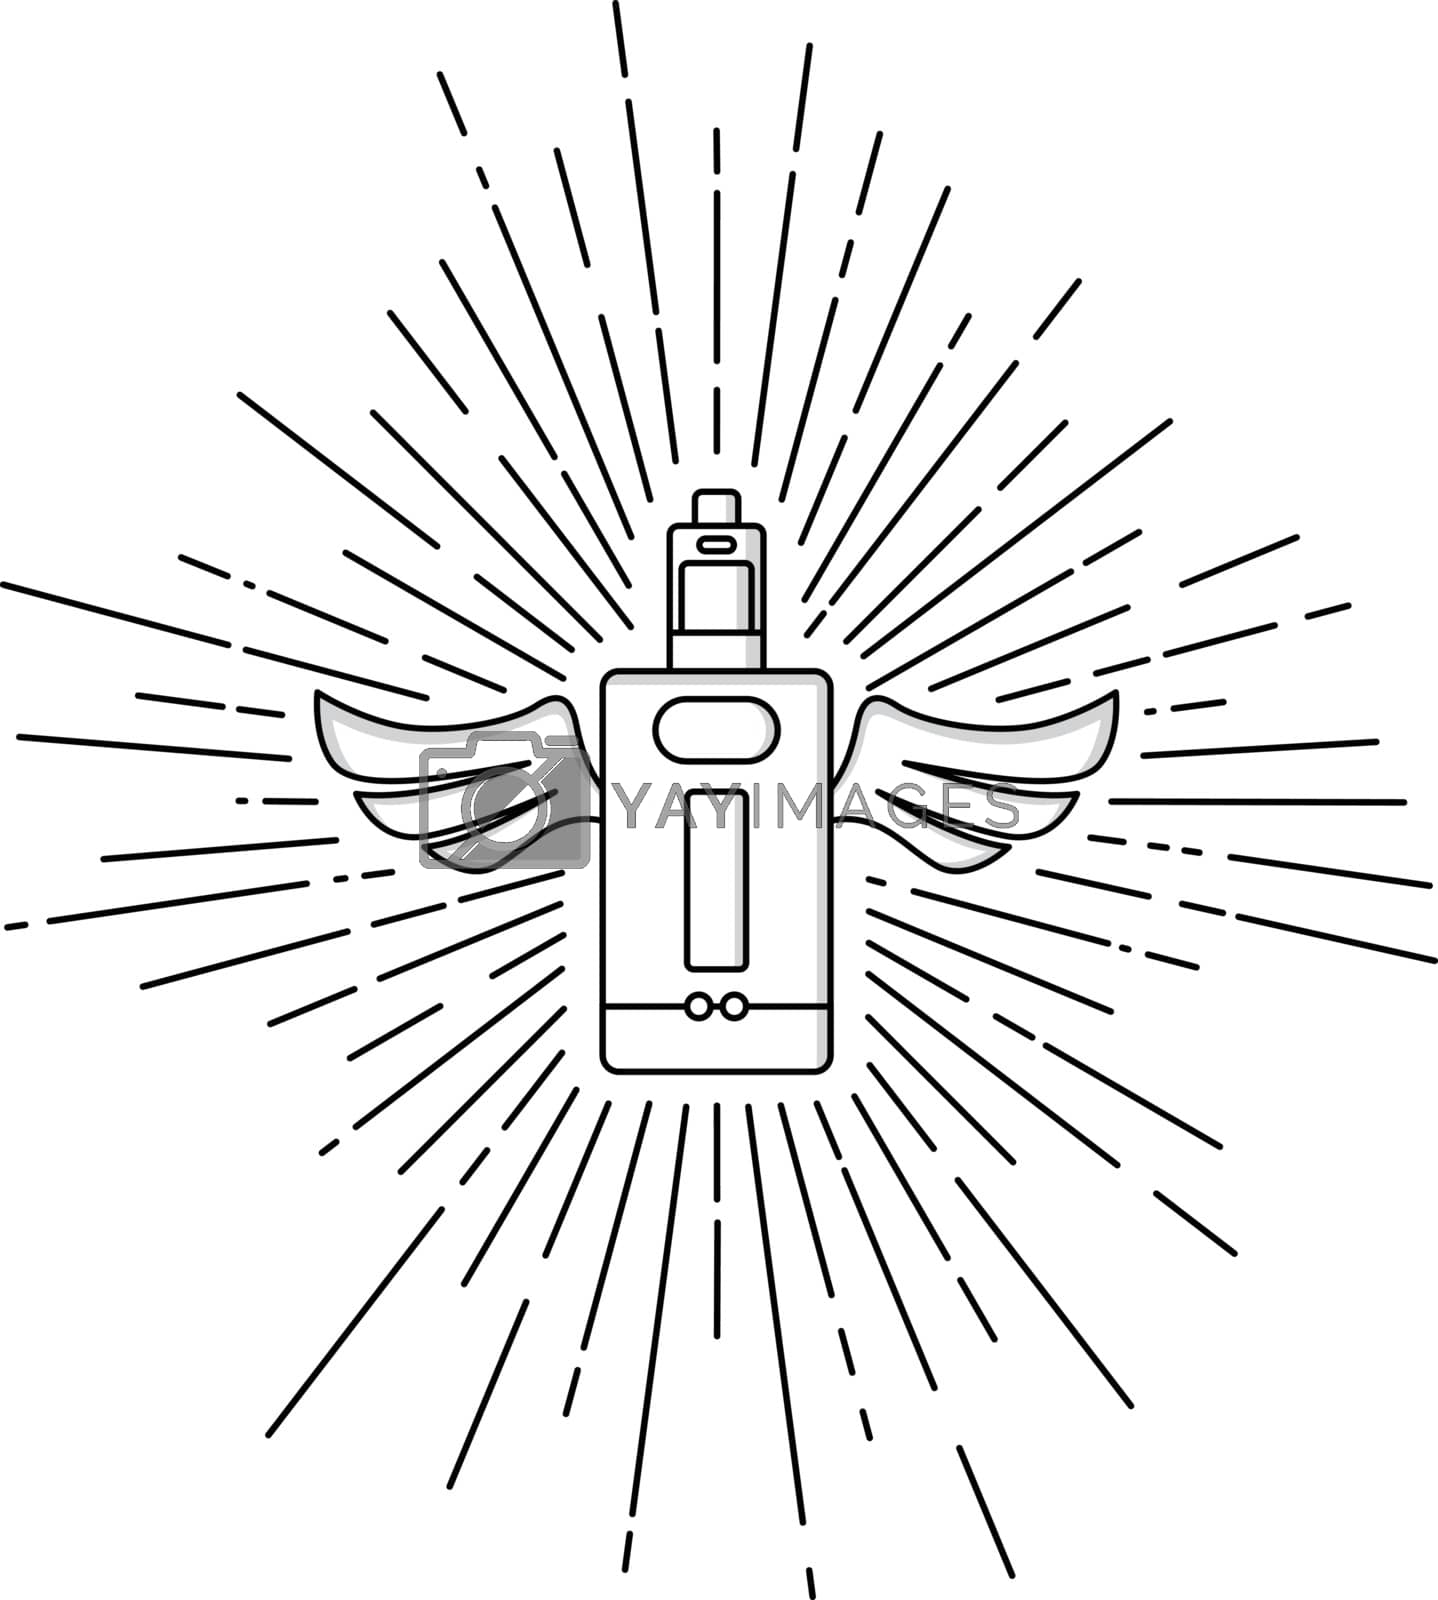 Royalty free image of sunray burst electric cigarette personal vaporizer by vector1st